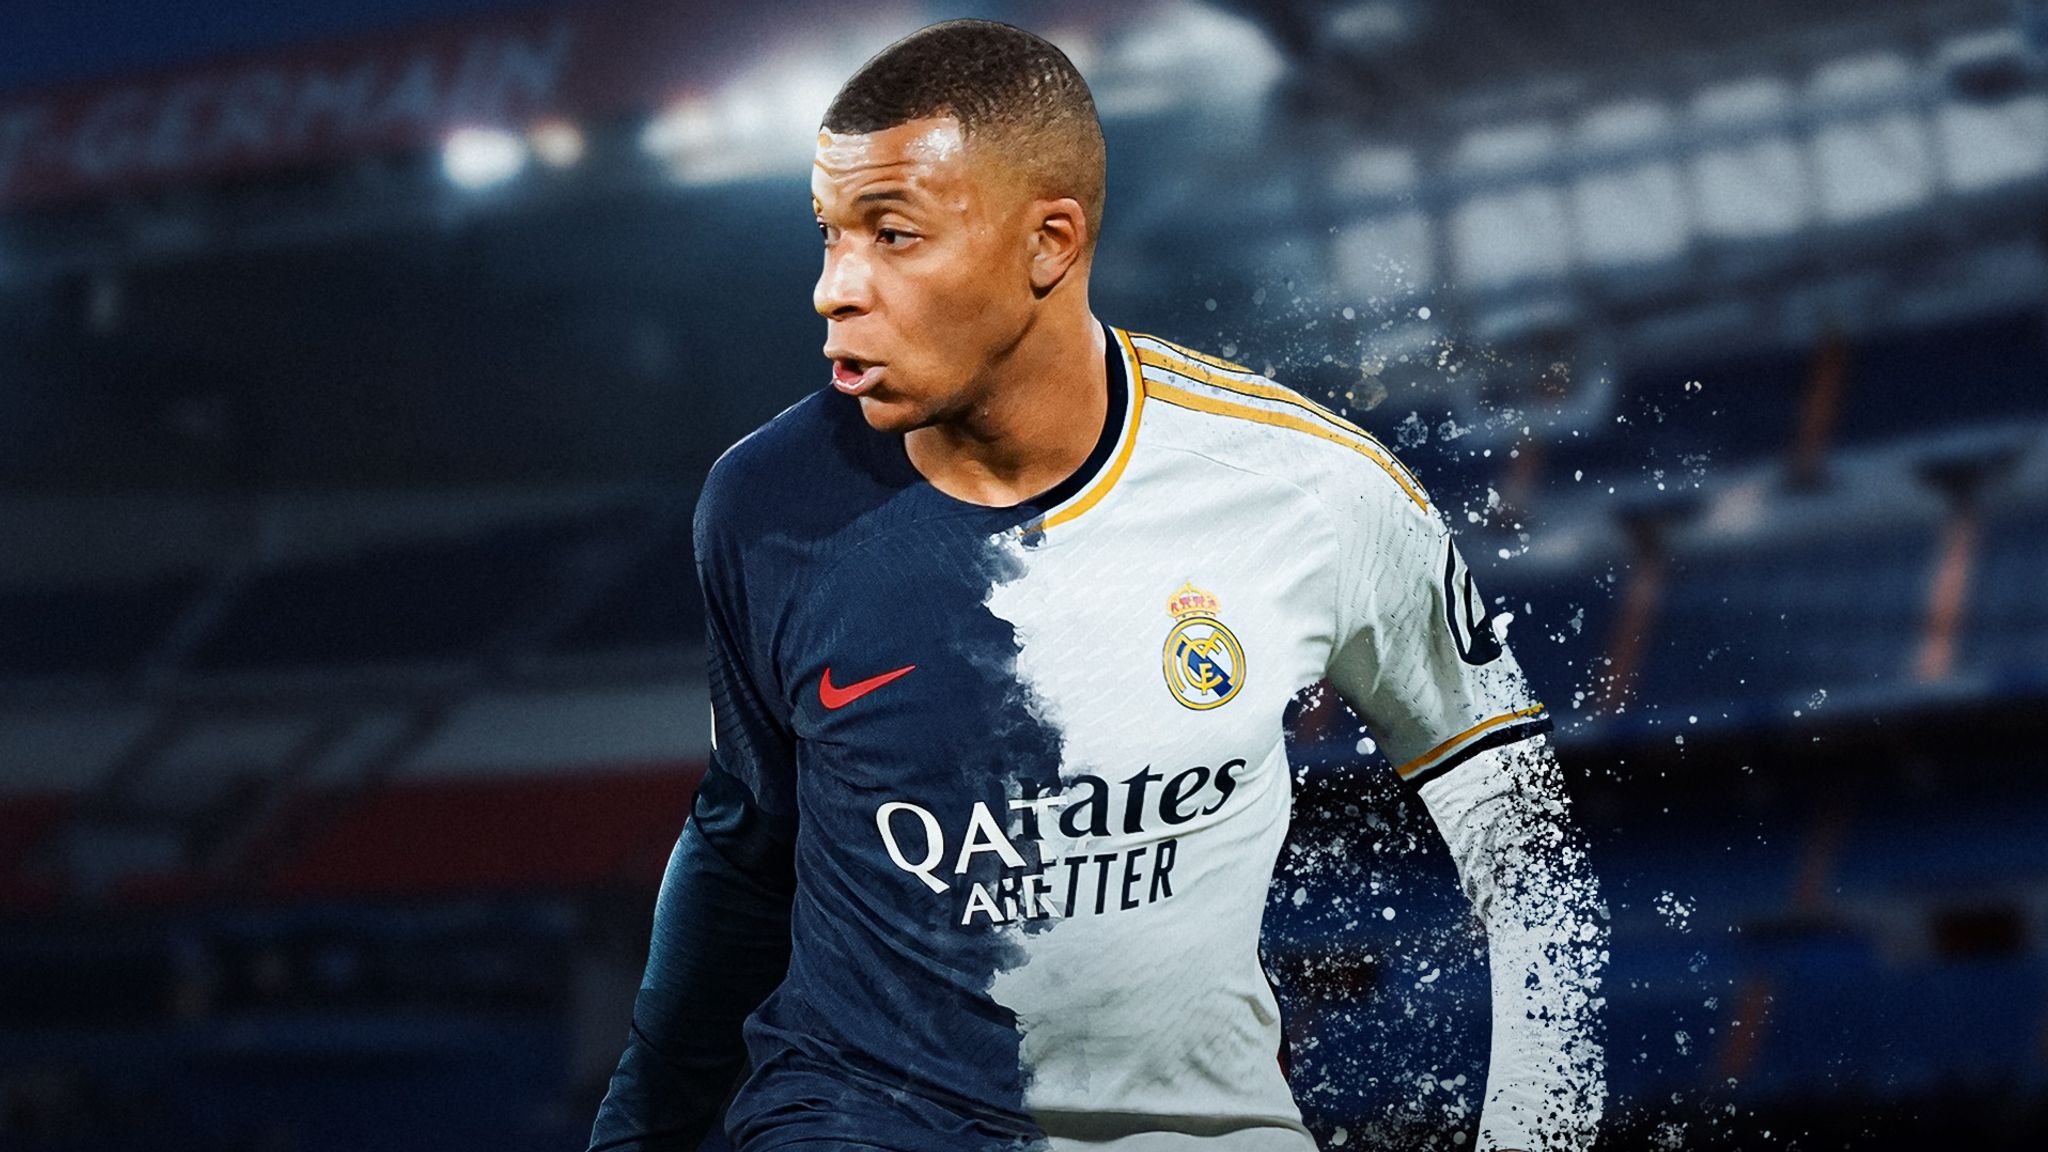 Kylian Mbappe: Real Madrid sign France forward on free transfer after Paris Saint-Germain contract expiry | Football News | Sky Sports